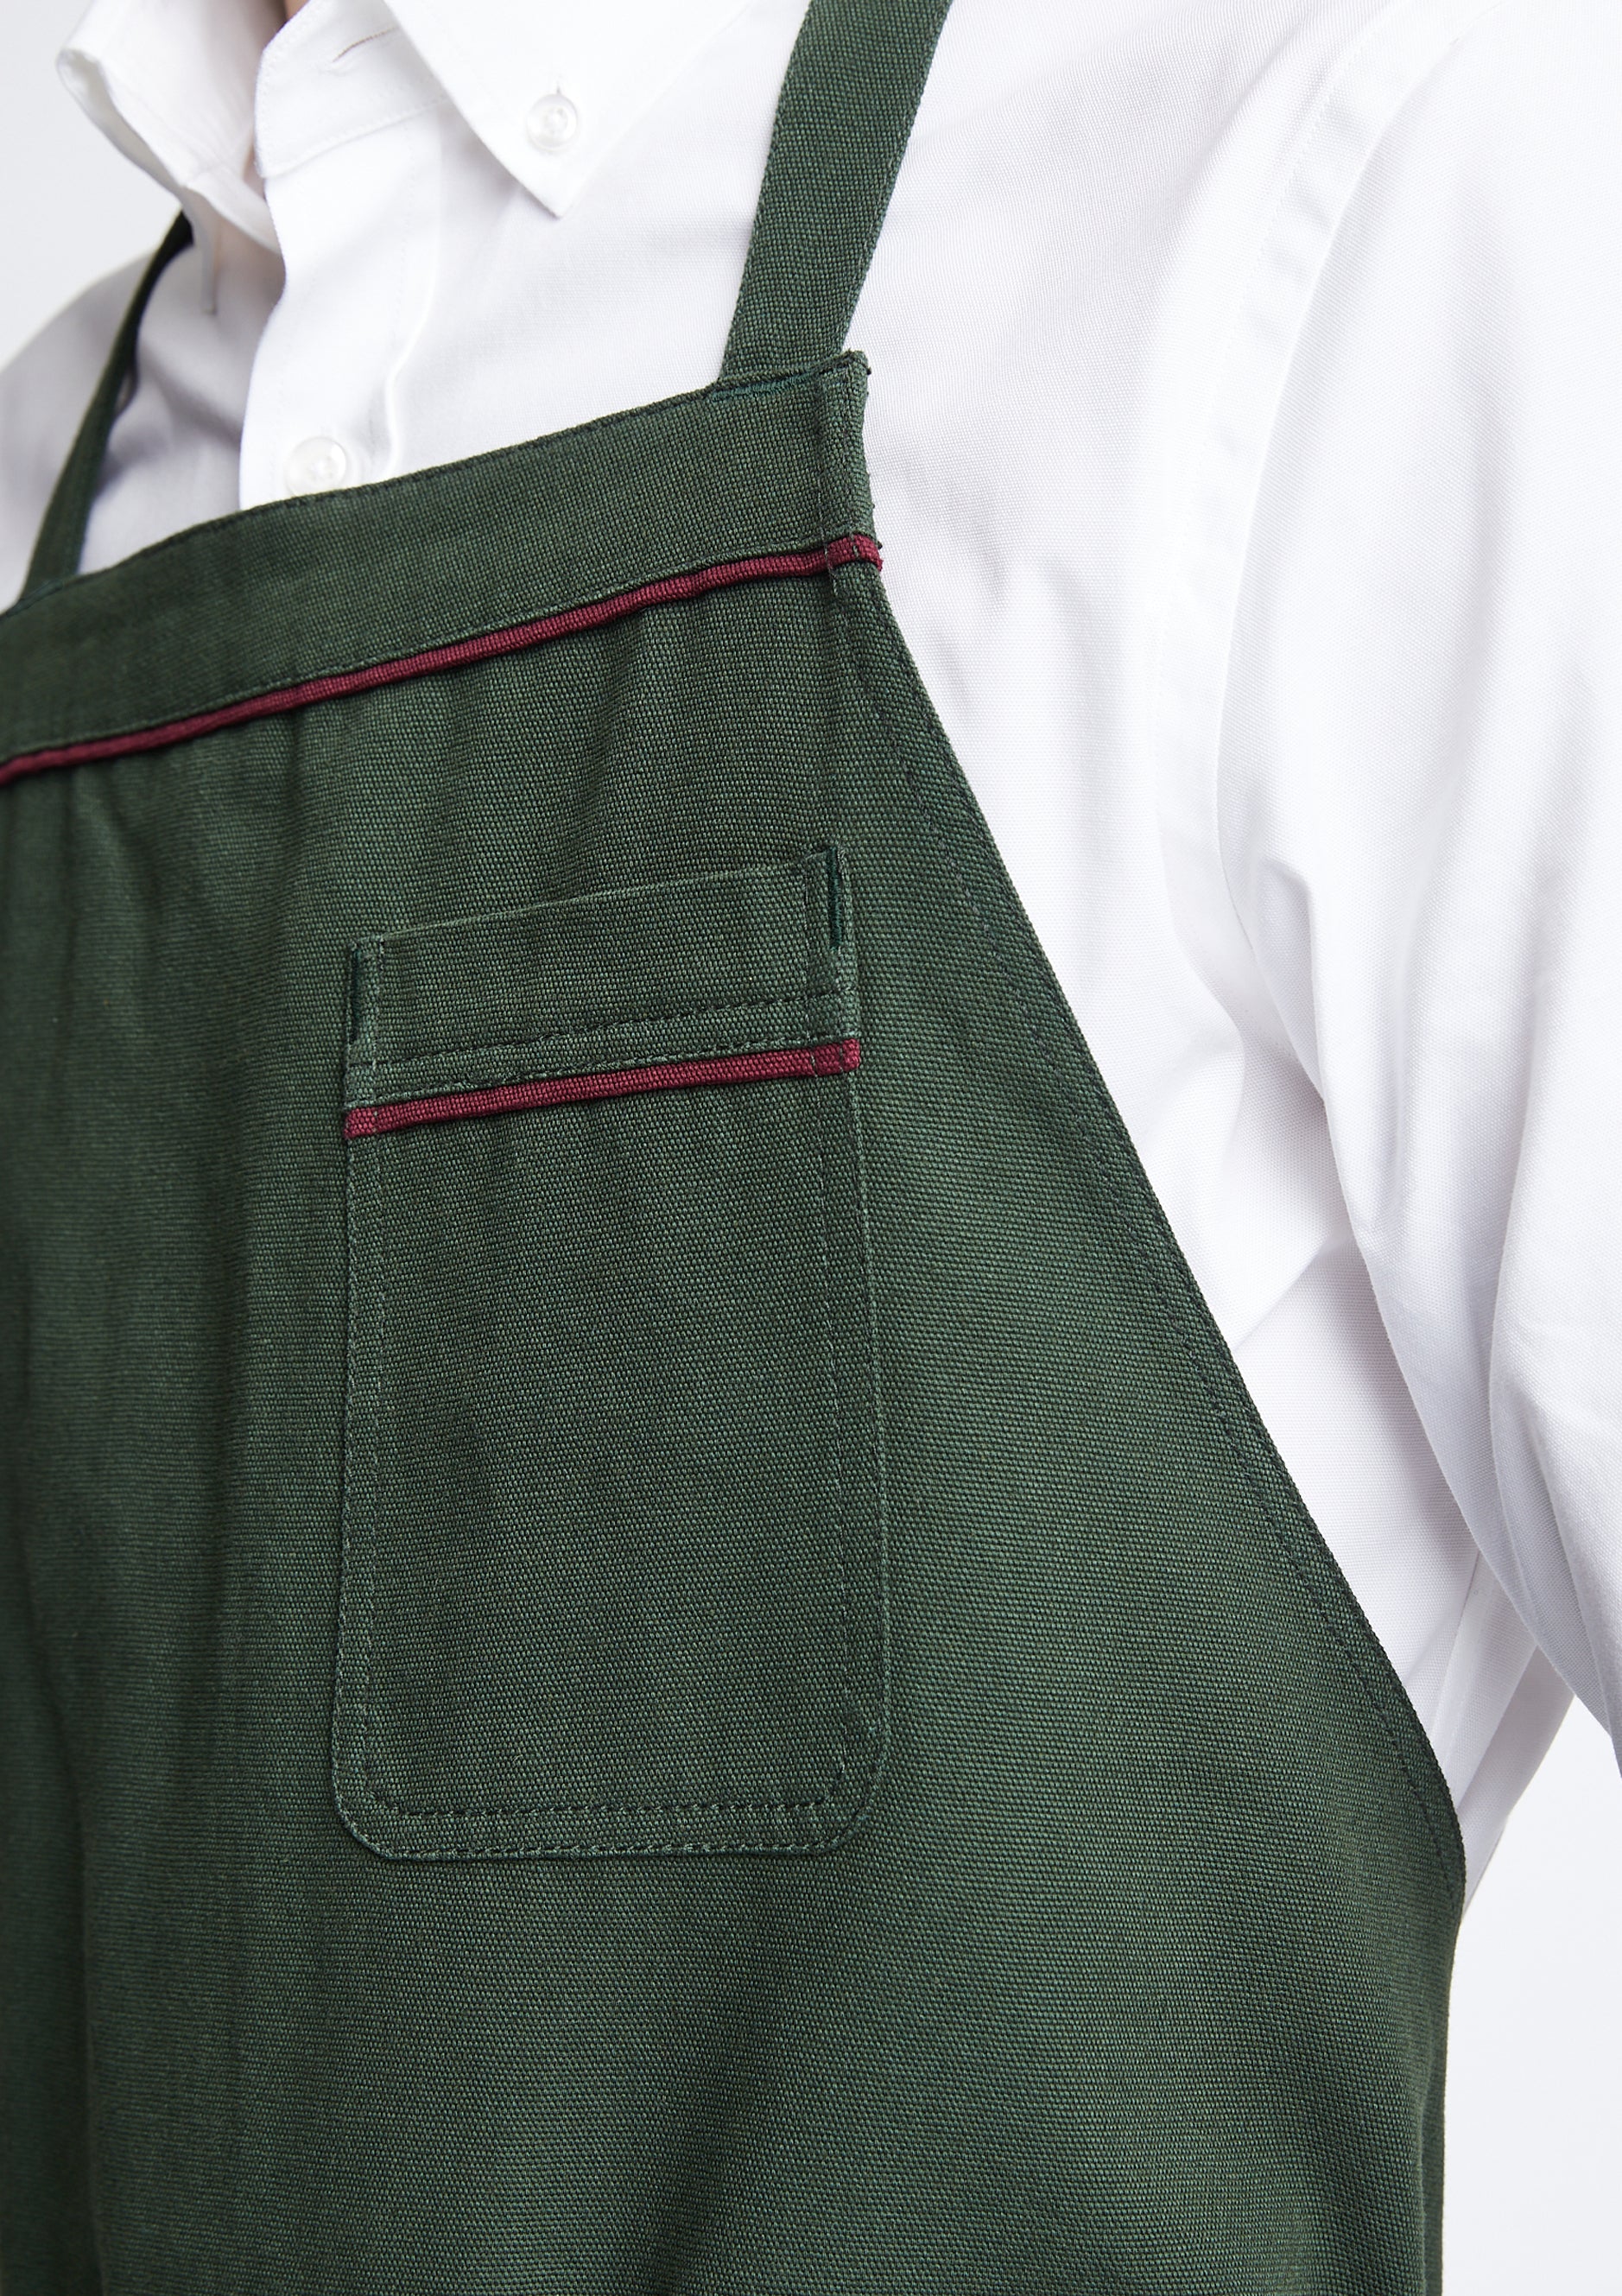 Austin Canvas Halter Apron in Forest Green with Burgundy Piping